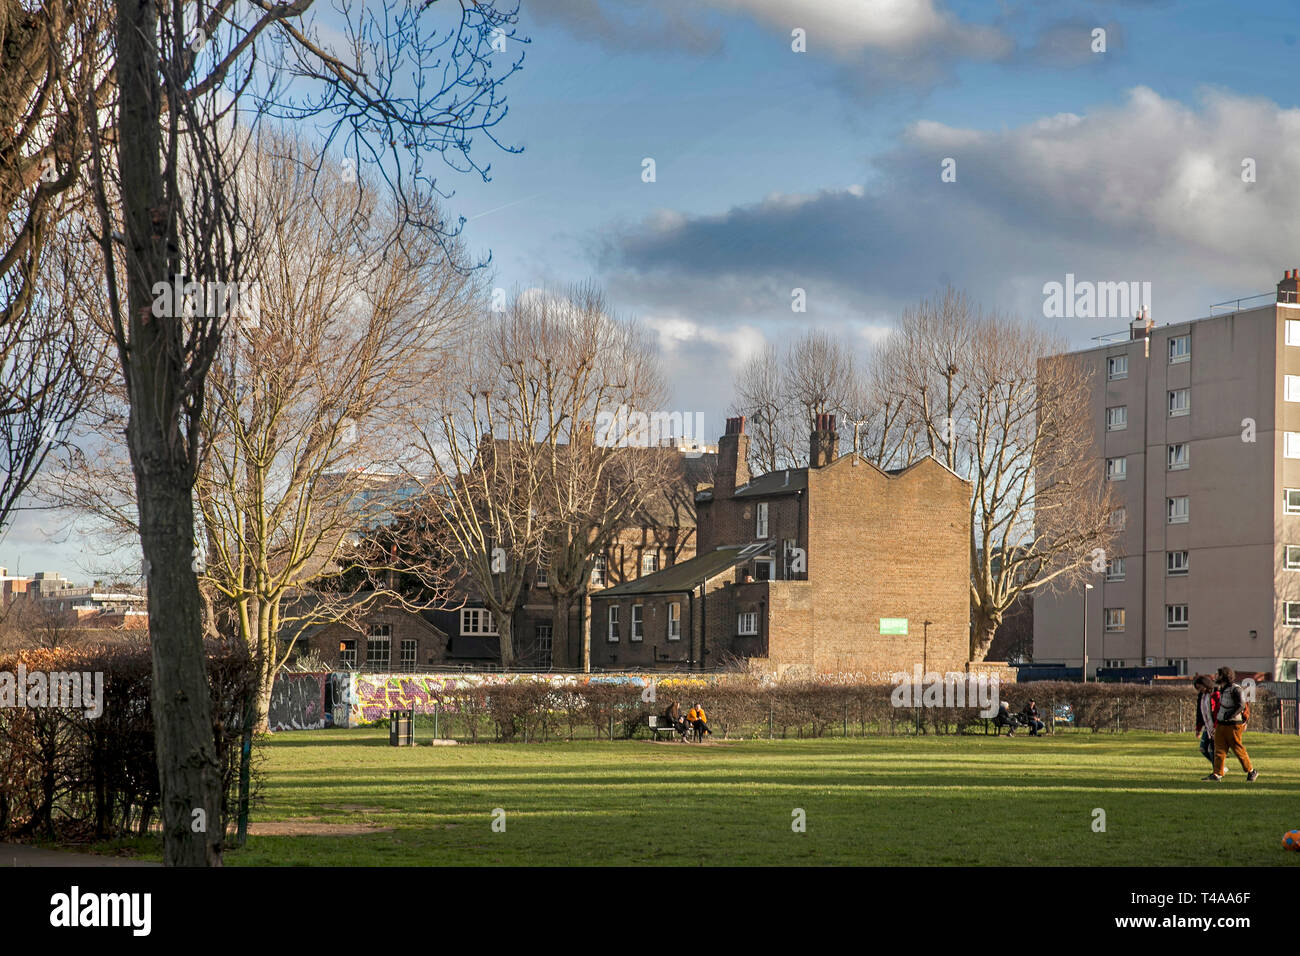 LONDON - FEBRUARY 17, 2019: View of the park near Bricklane in East London Stock Photo